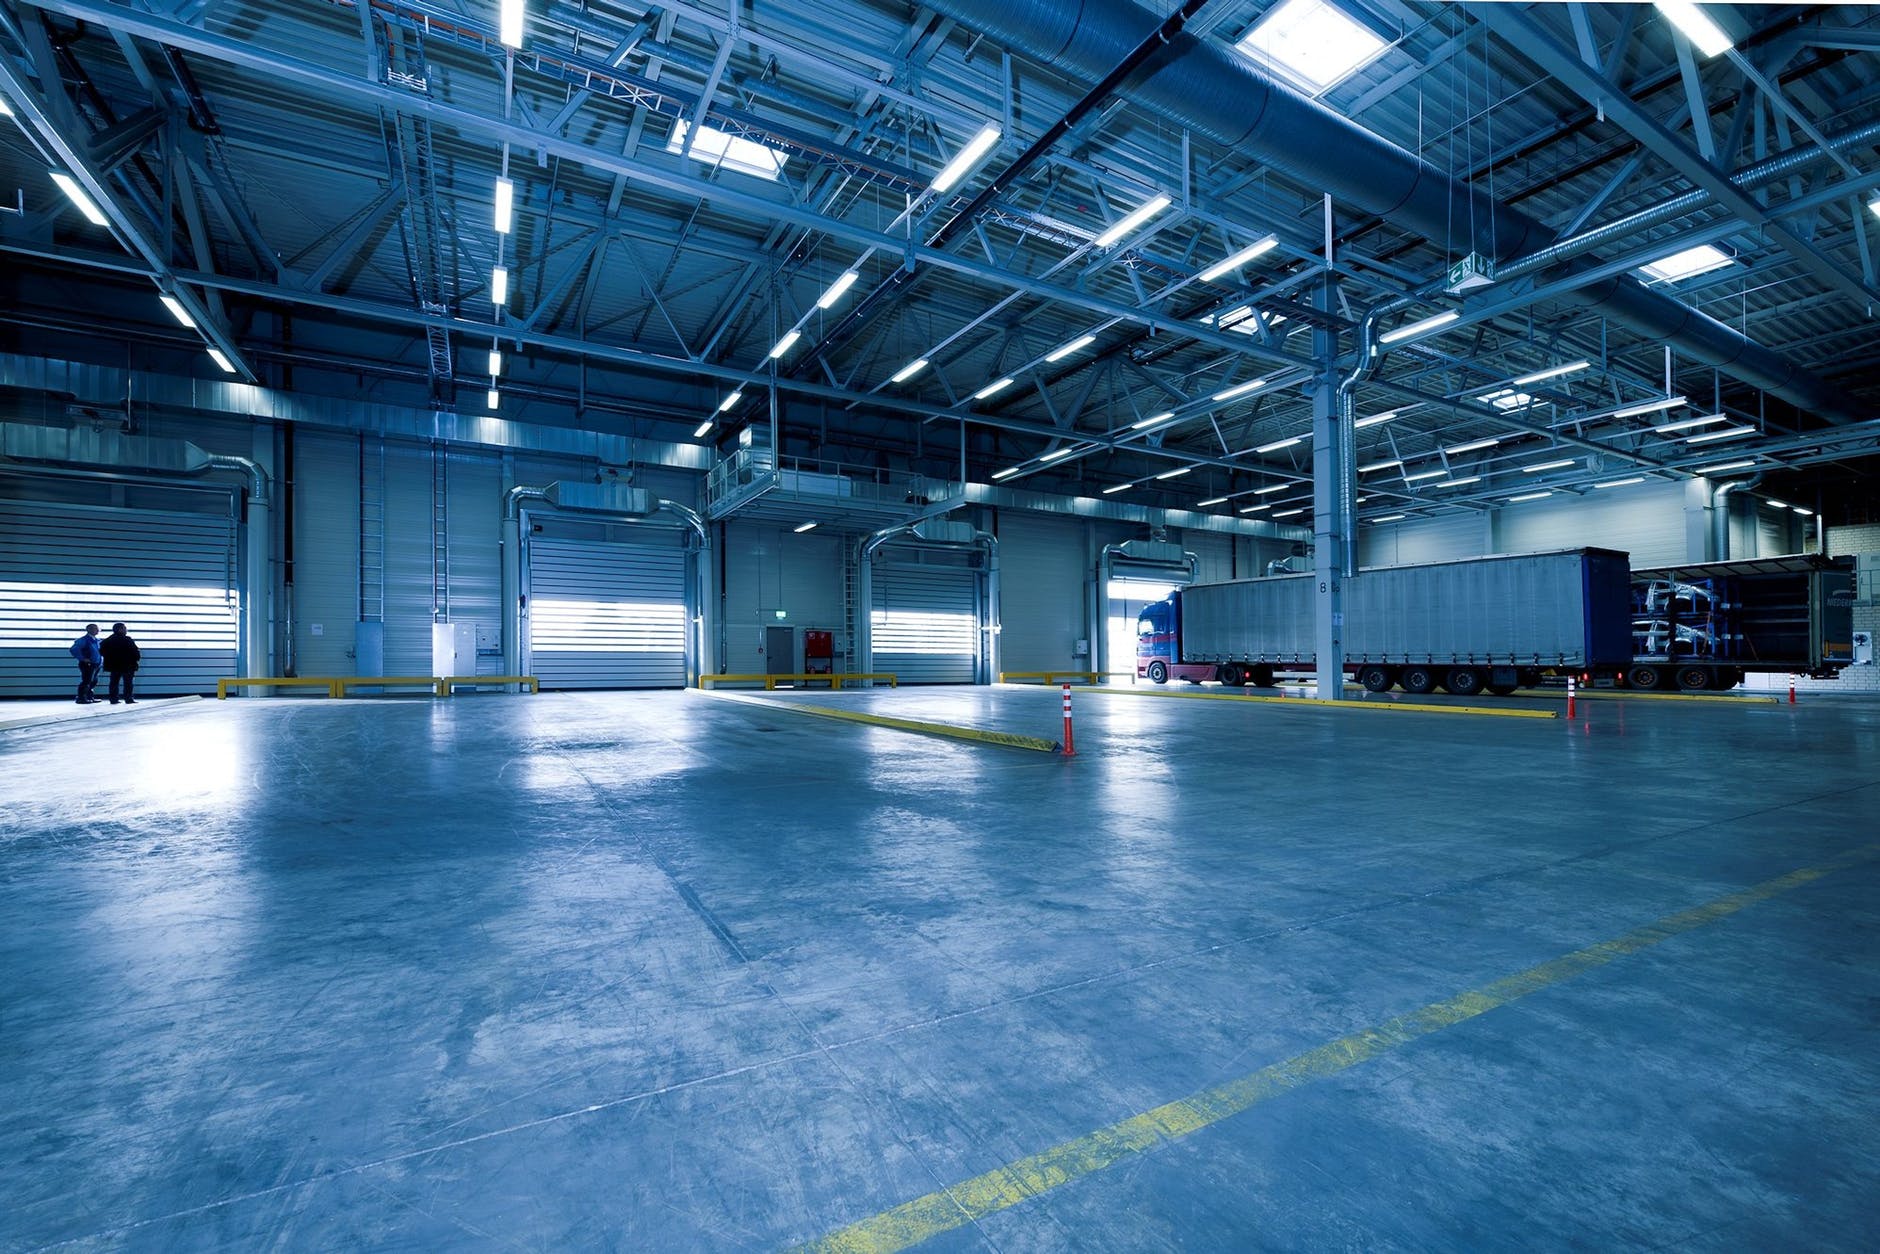 London Warehousing Rent Continues to Increase